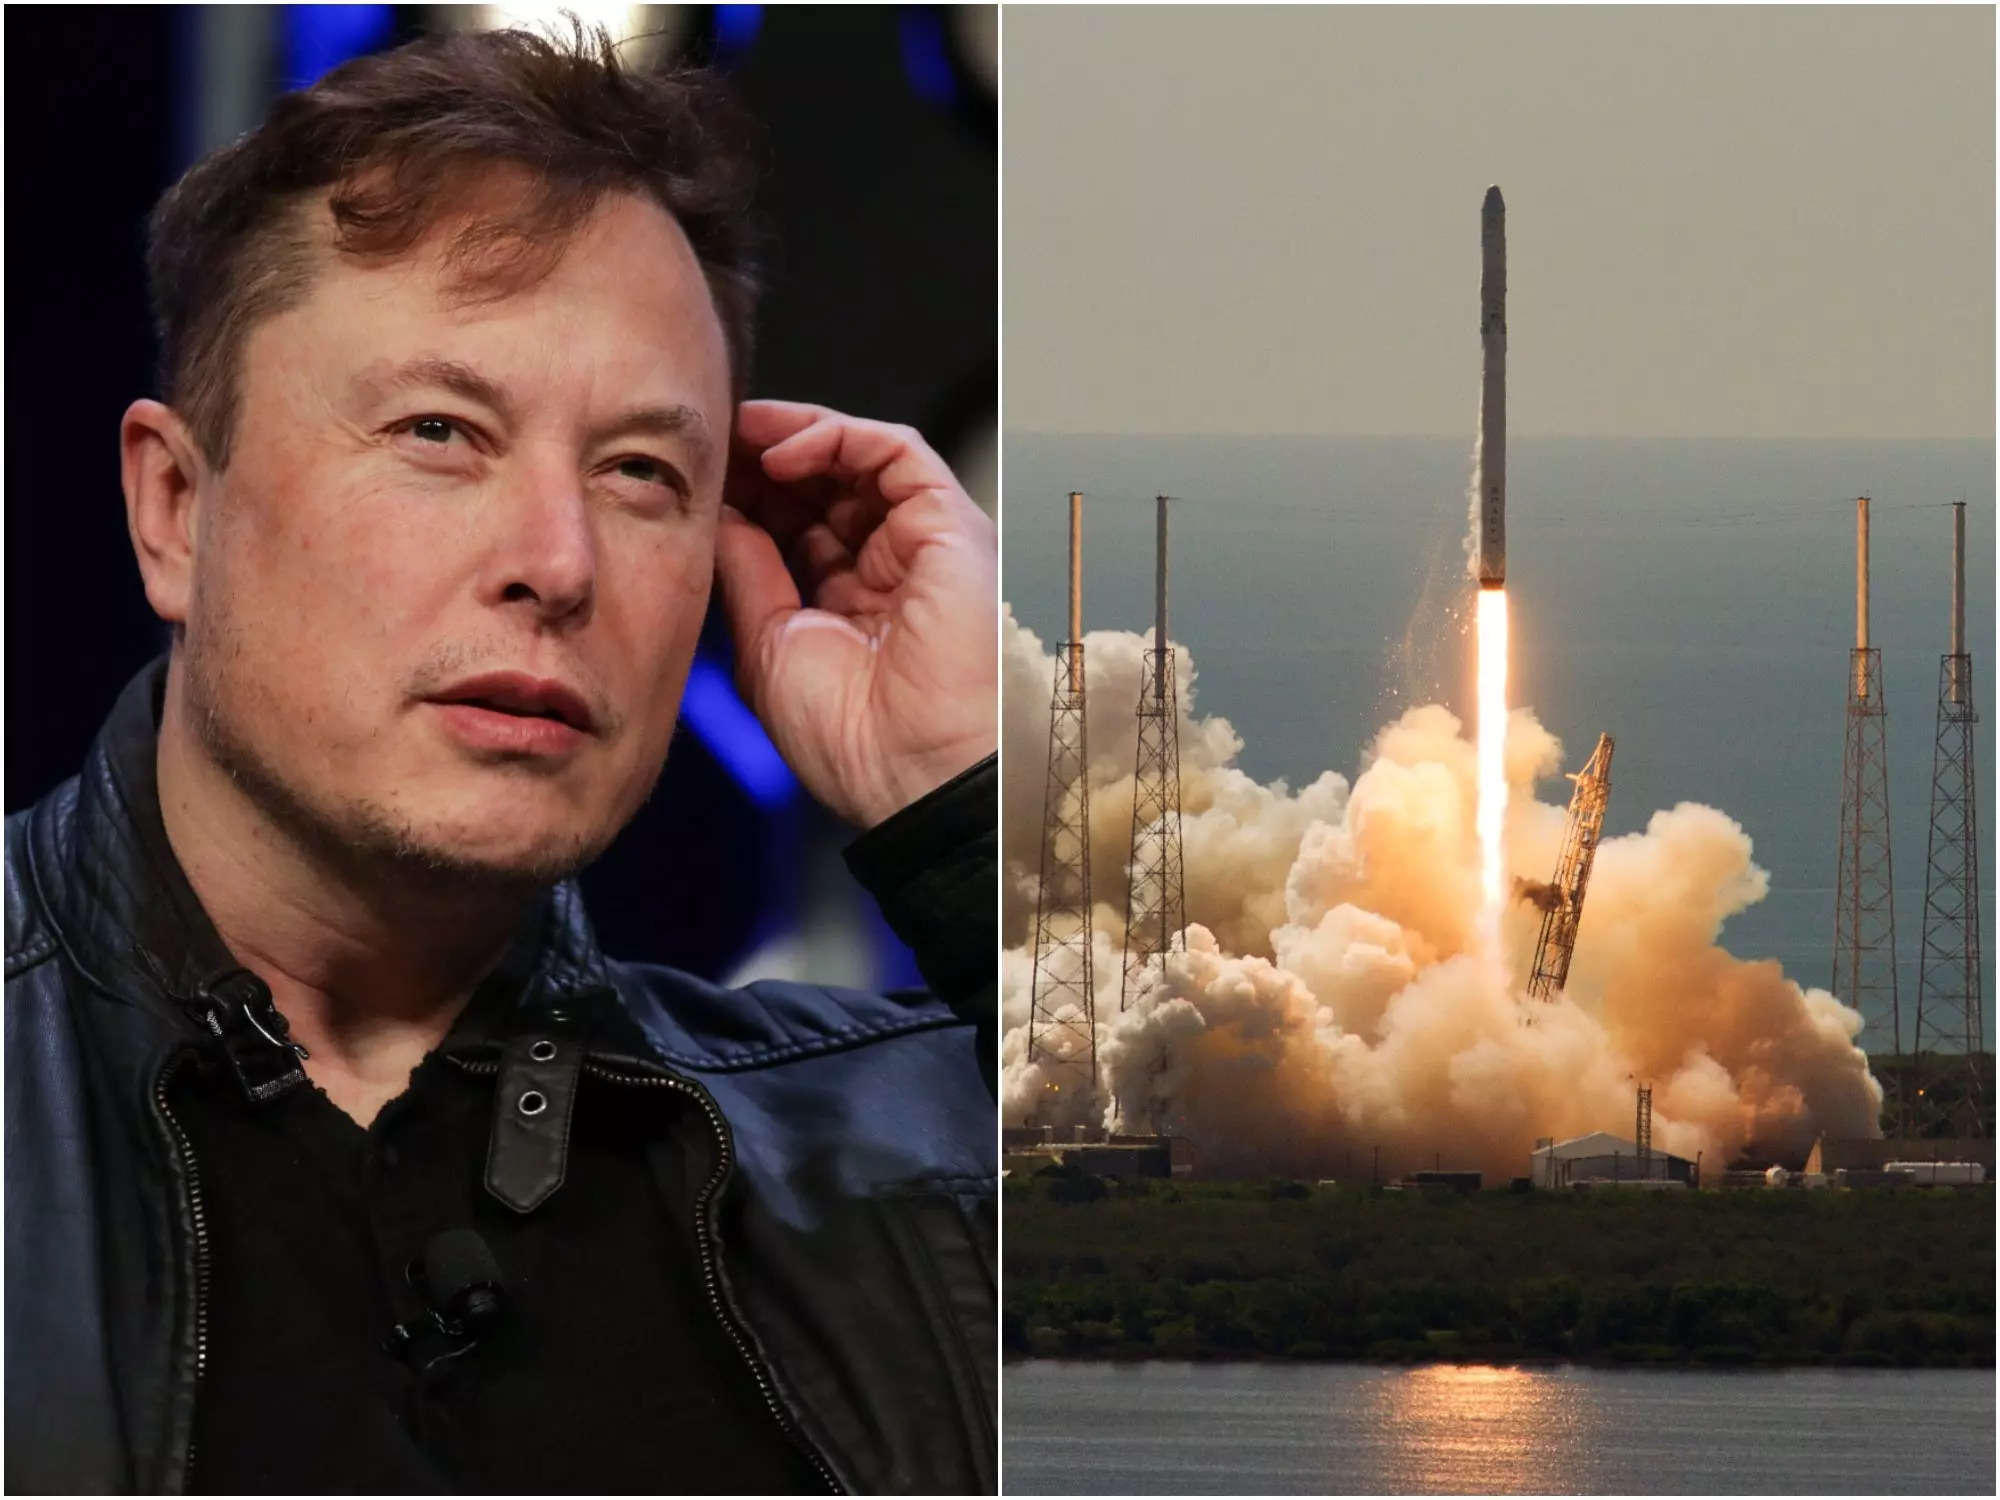 Musk's Starlink satellites are leaking radiation - India Today